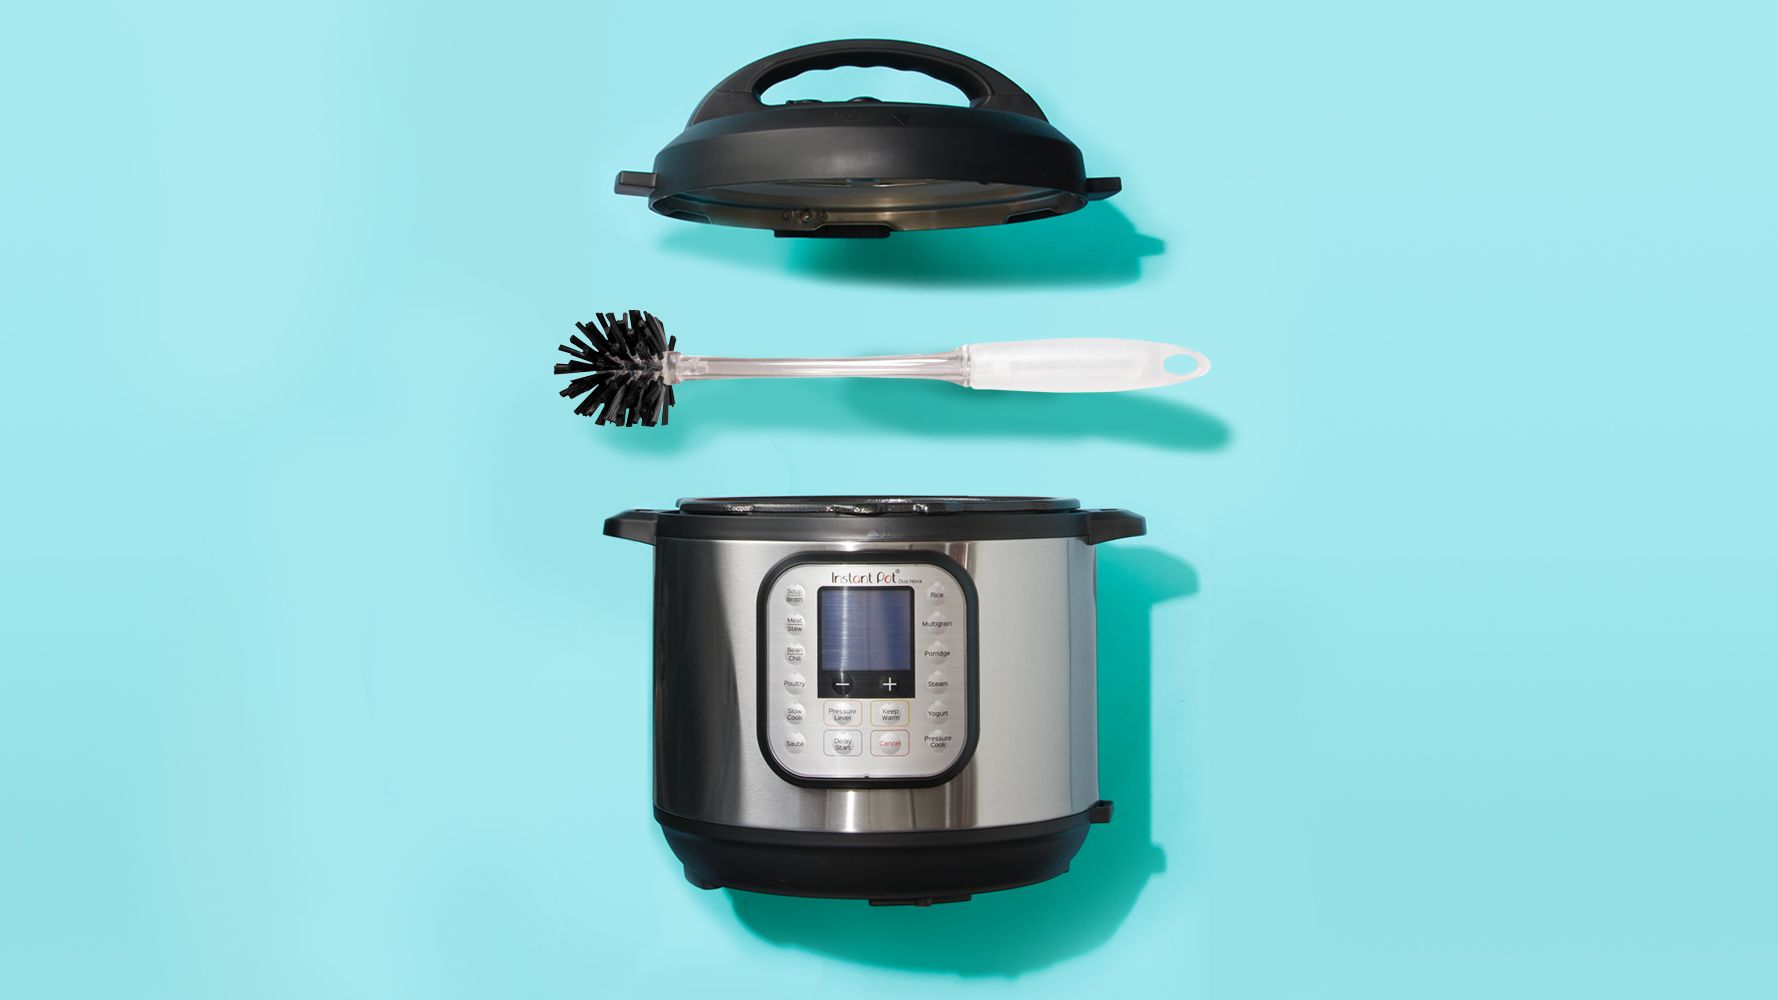 HOW TO INSTALL THE MOISTURE CATCHER ON AN INSTANT POT 